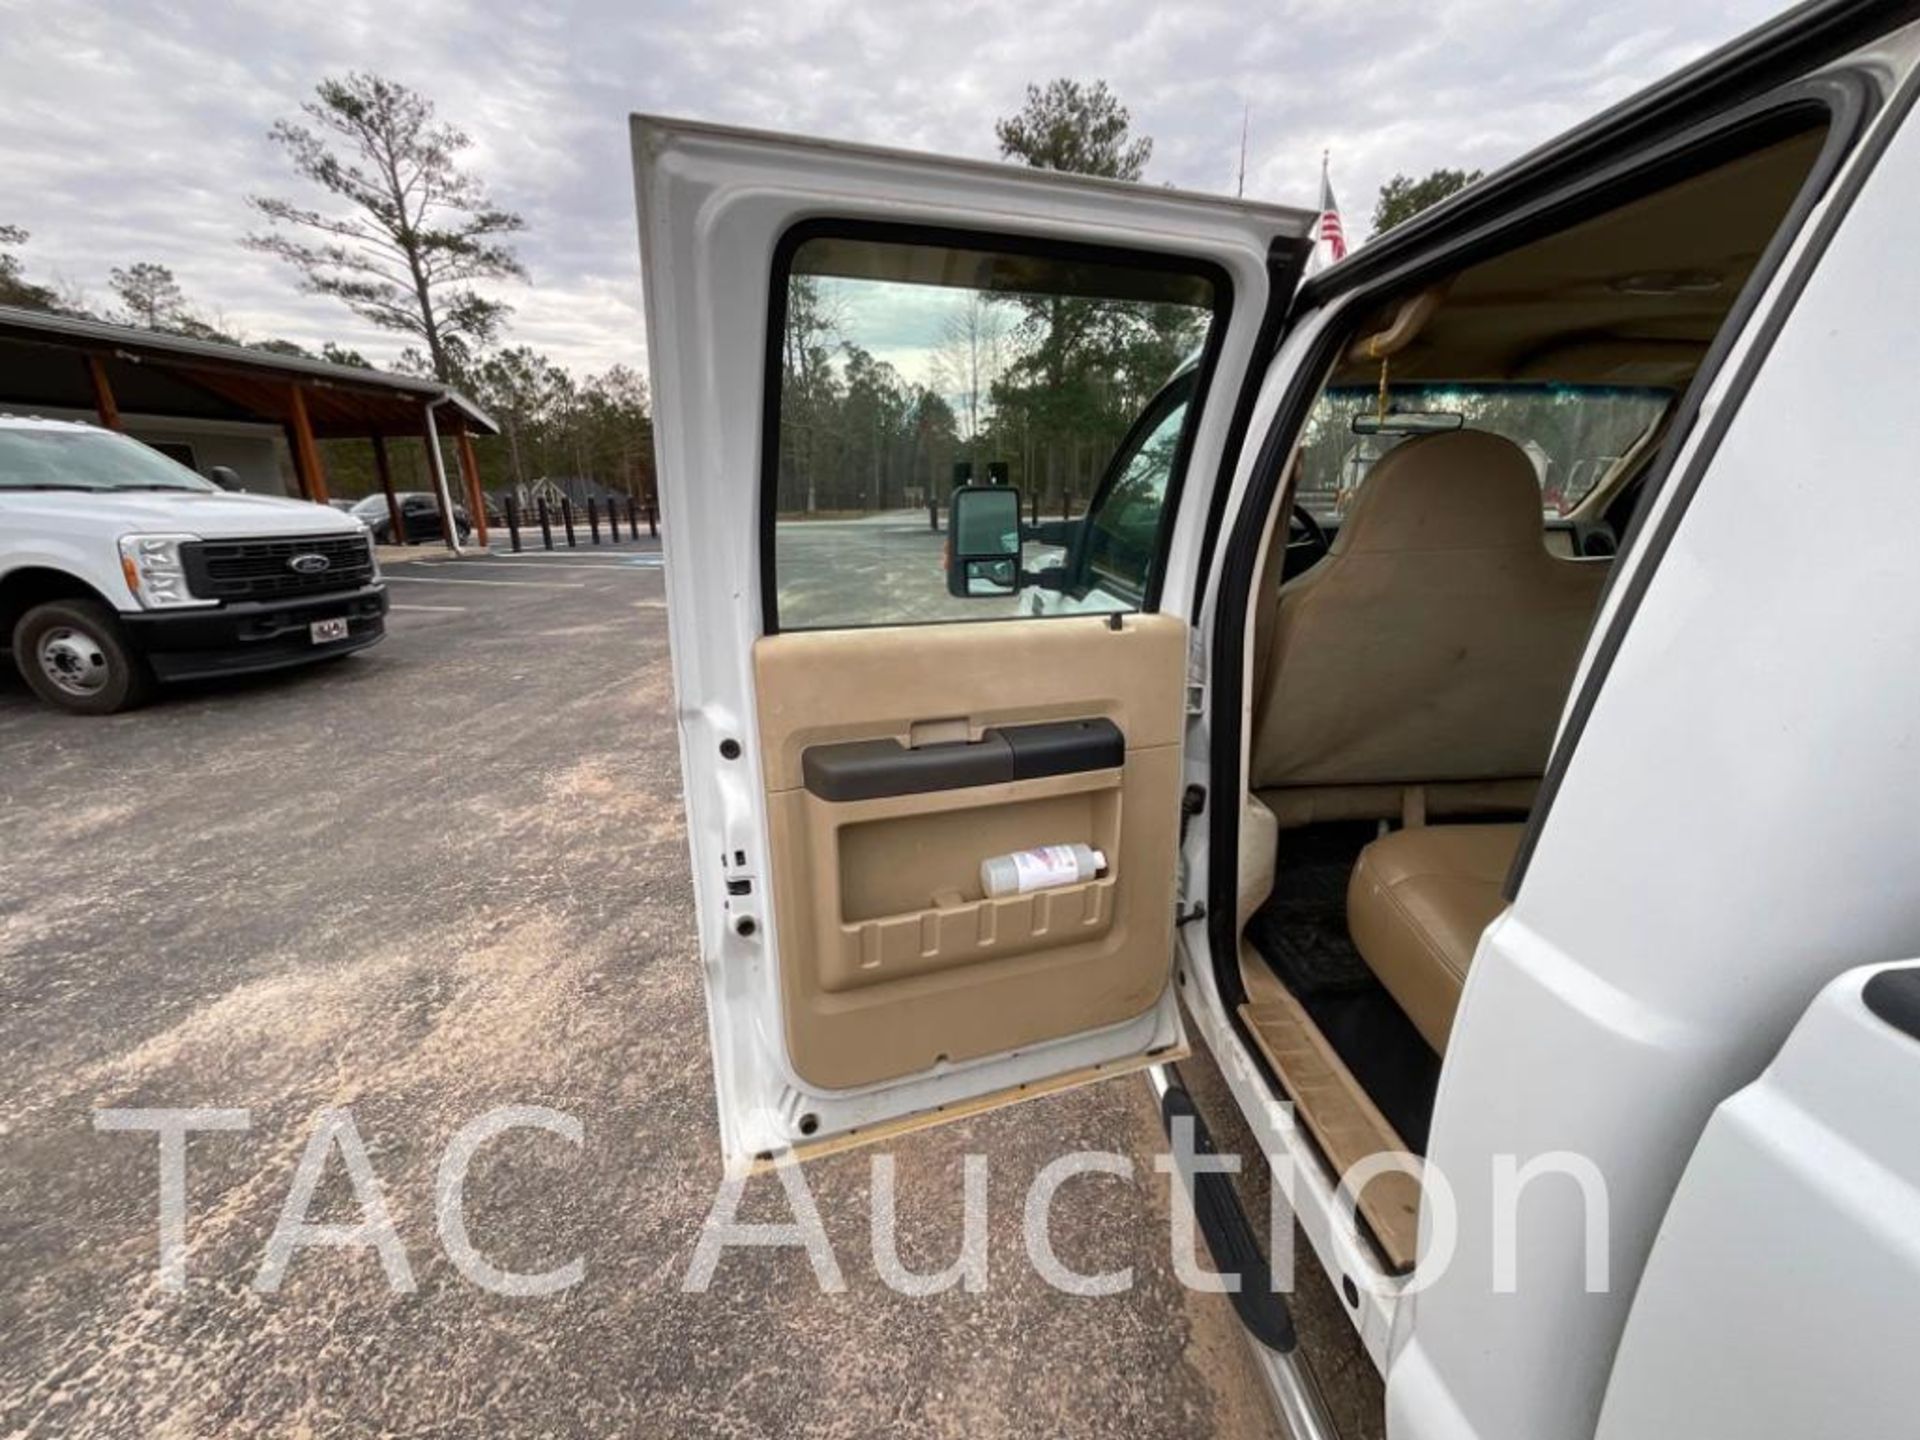 2008 Ford F-350 Super Duty Crew Cab Pickup Truck - Image 25 of 50